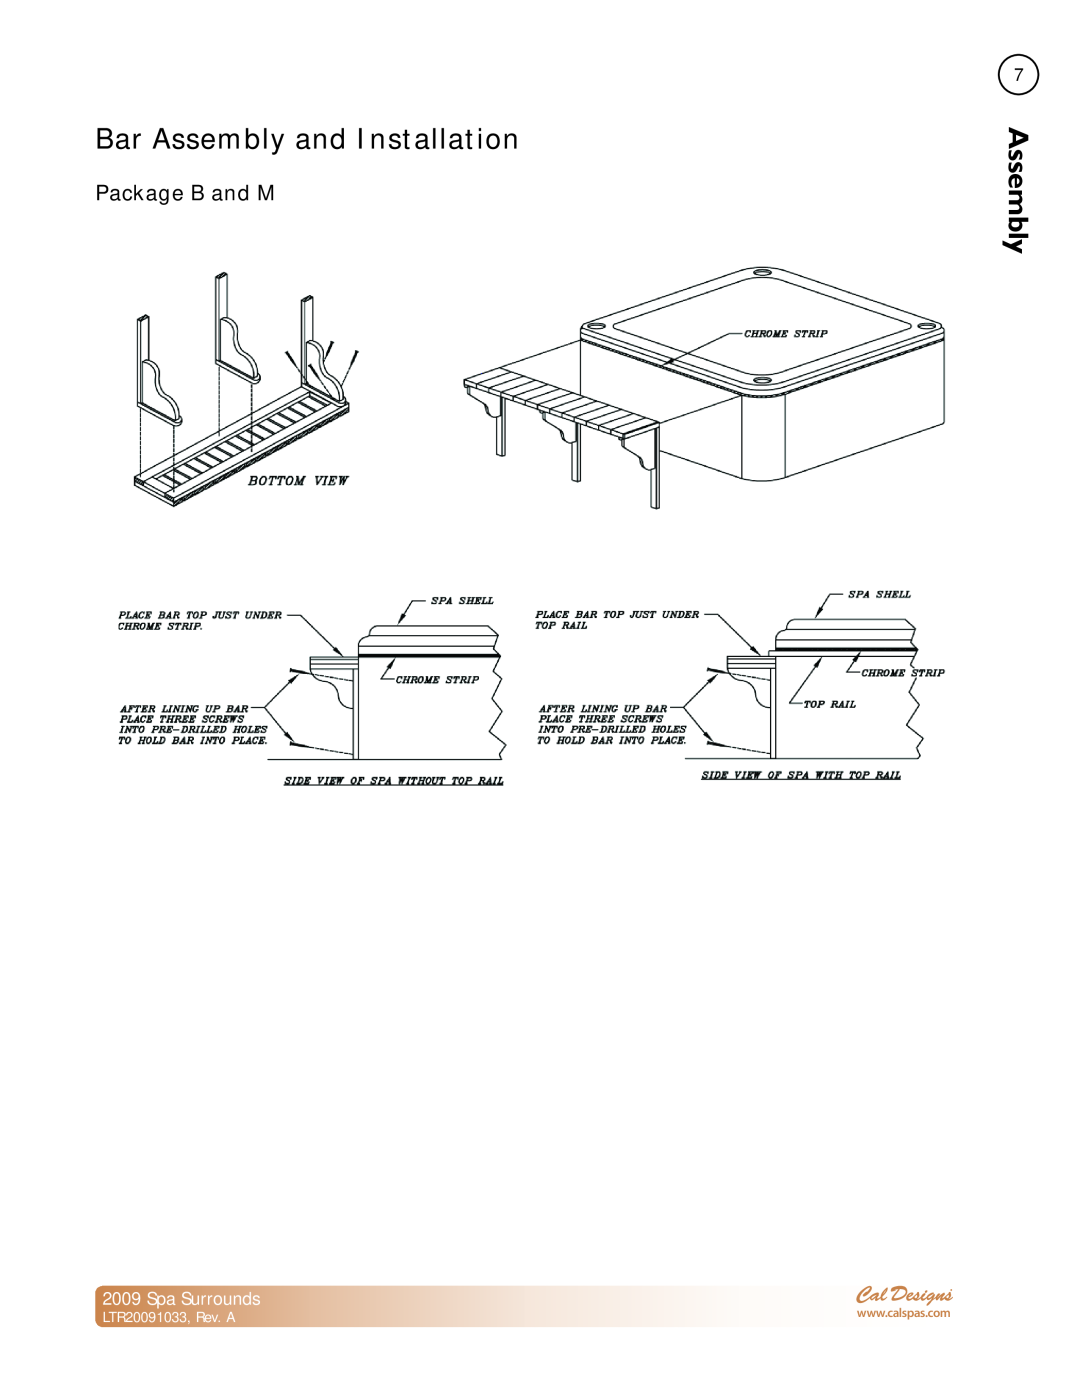 Cal Spas Spa Surrounds manual Bar Assembly and Installation, Package B and M, LTR20091033, Rev. A 